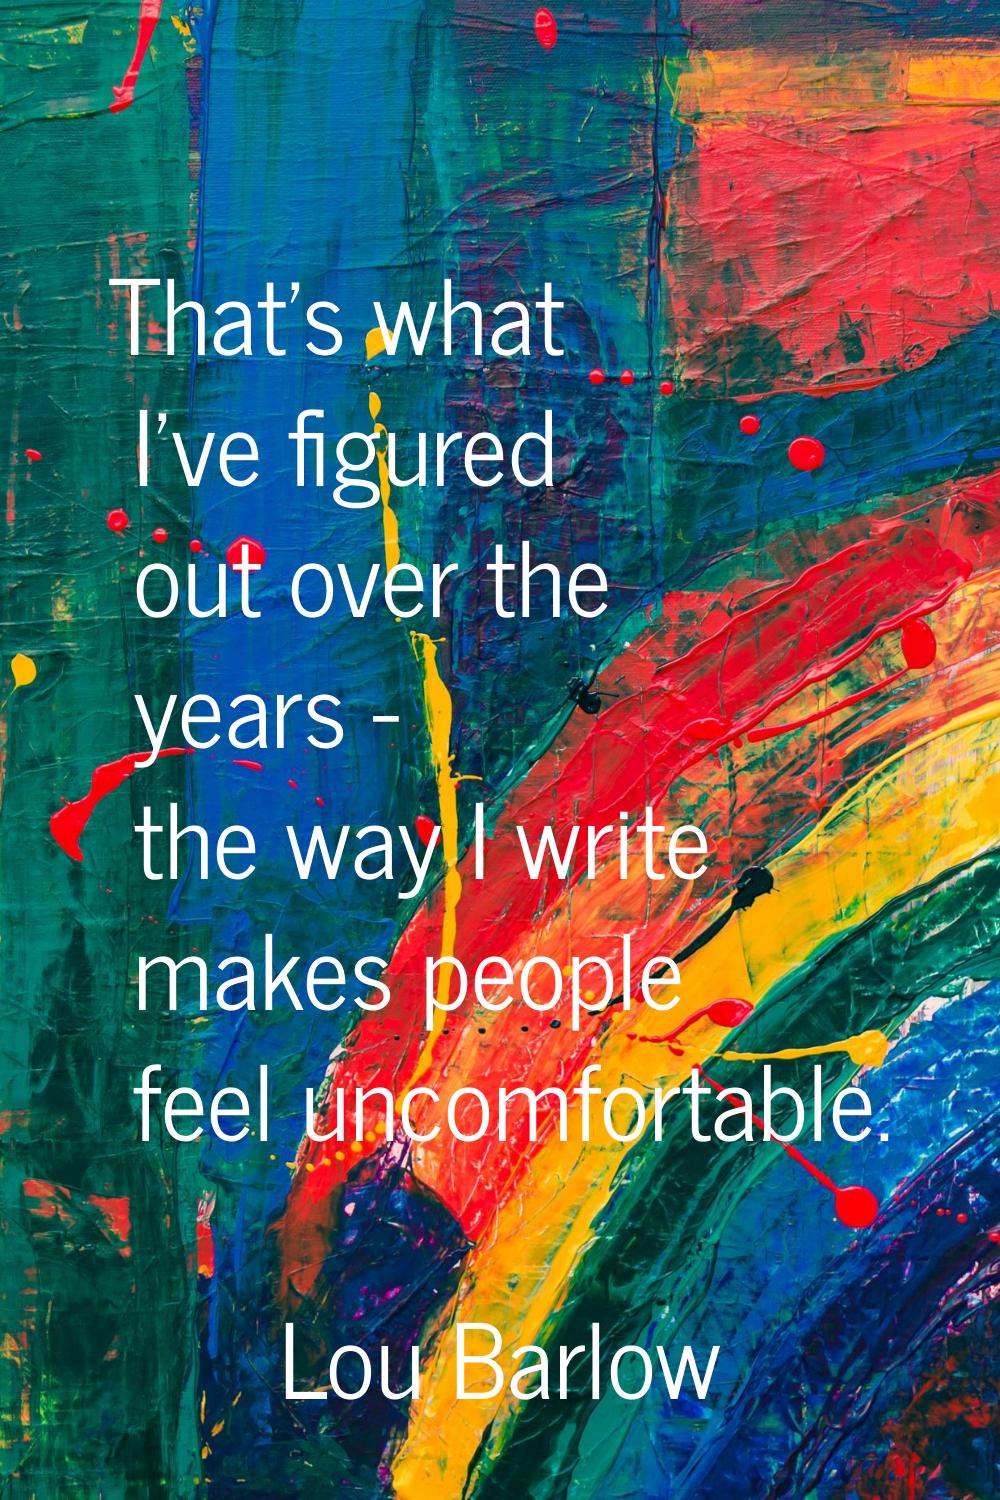 That's what I've figured out over the years - the way I write makes people feel uncomfortable.